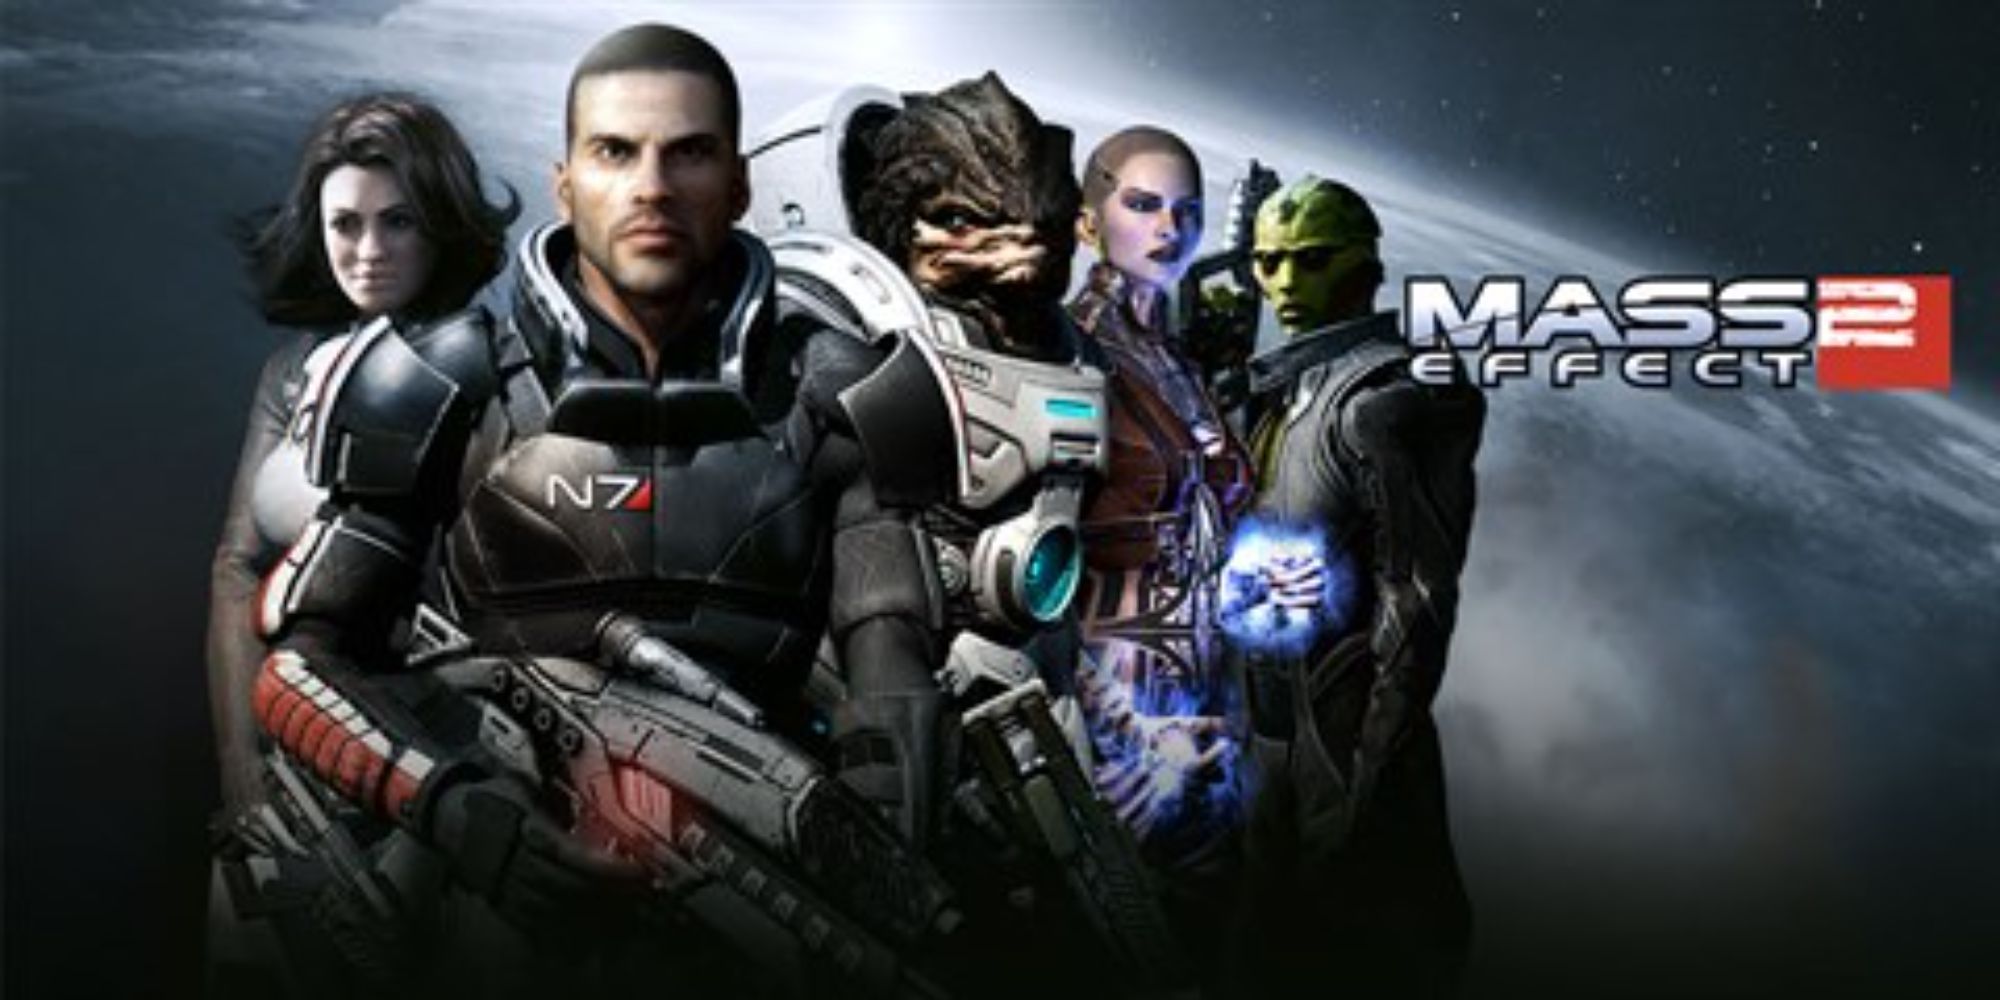 Mass Effect 2 cover poster with the central characters beside the title text